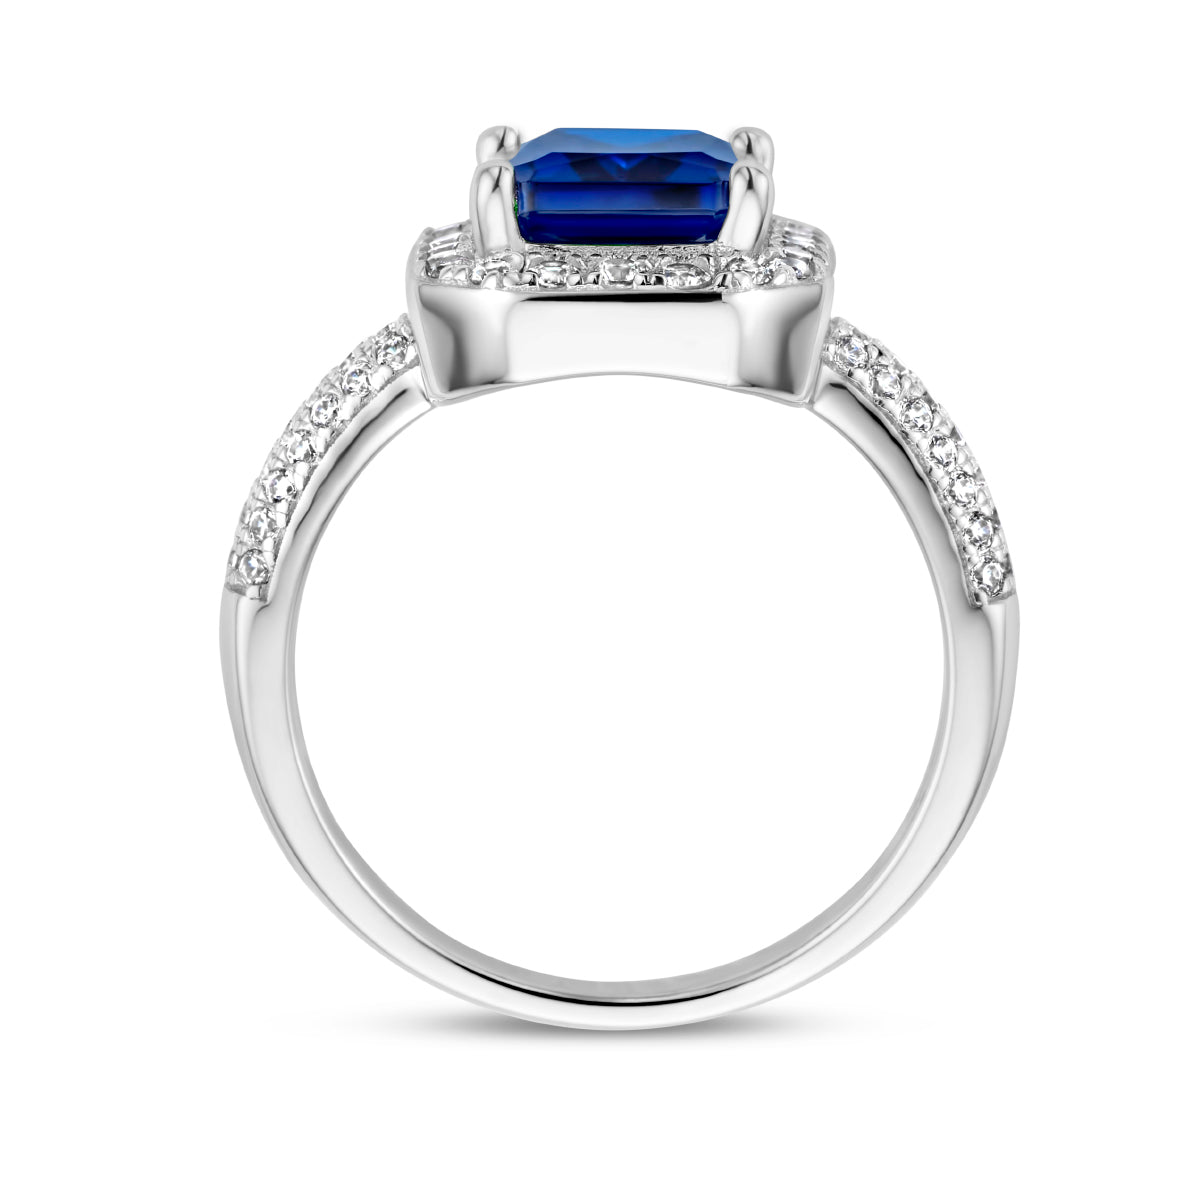 Ring blue and white zirconia